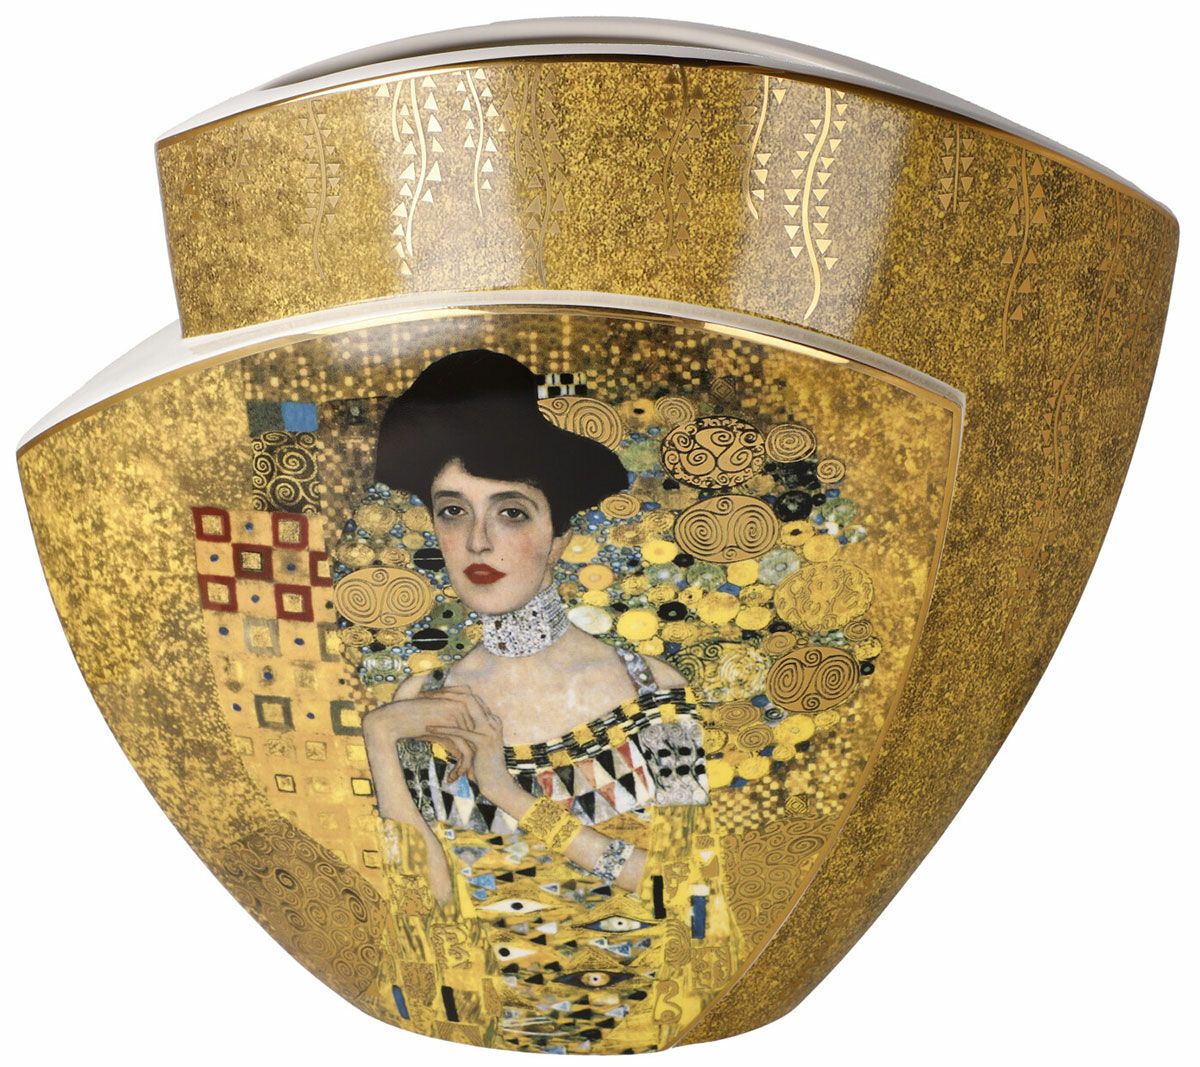 Double-sided porcelain vase "The Kiss / Adele Bloch-Bauer" with gold decoration by Gustav Klimt